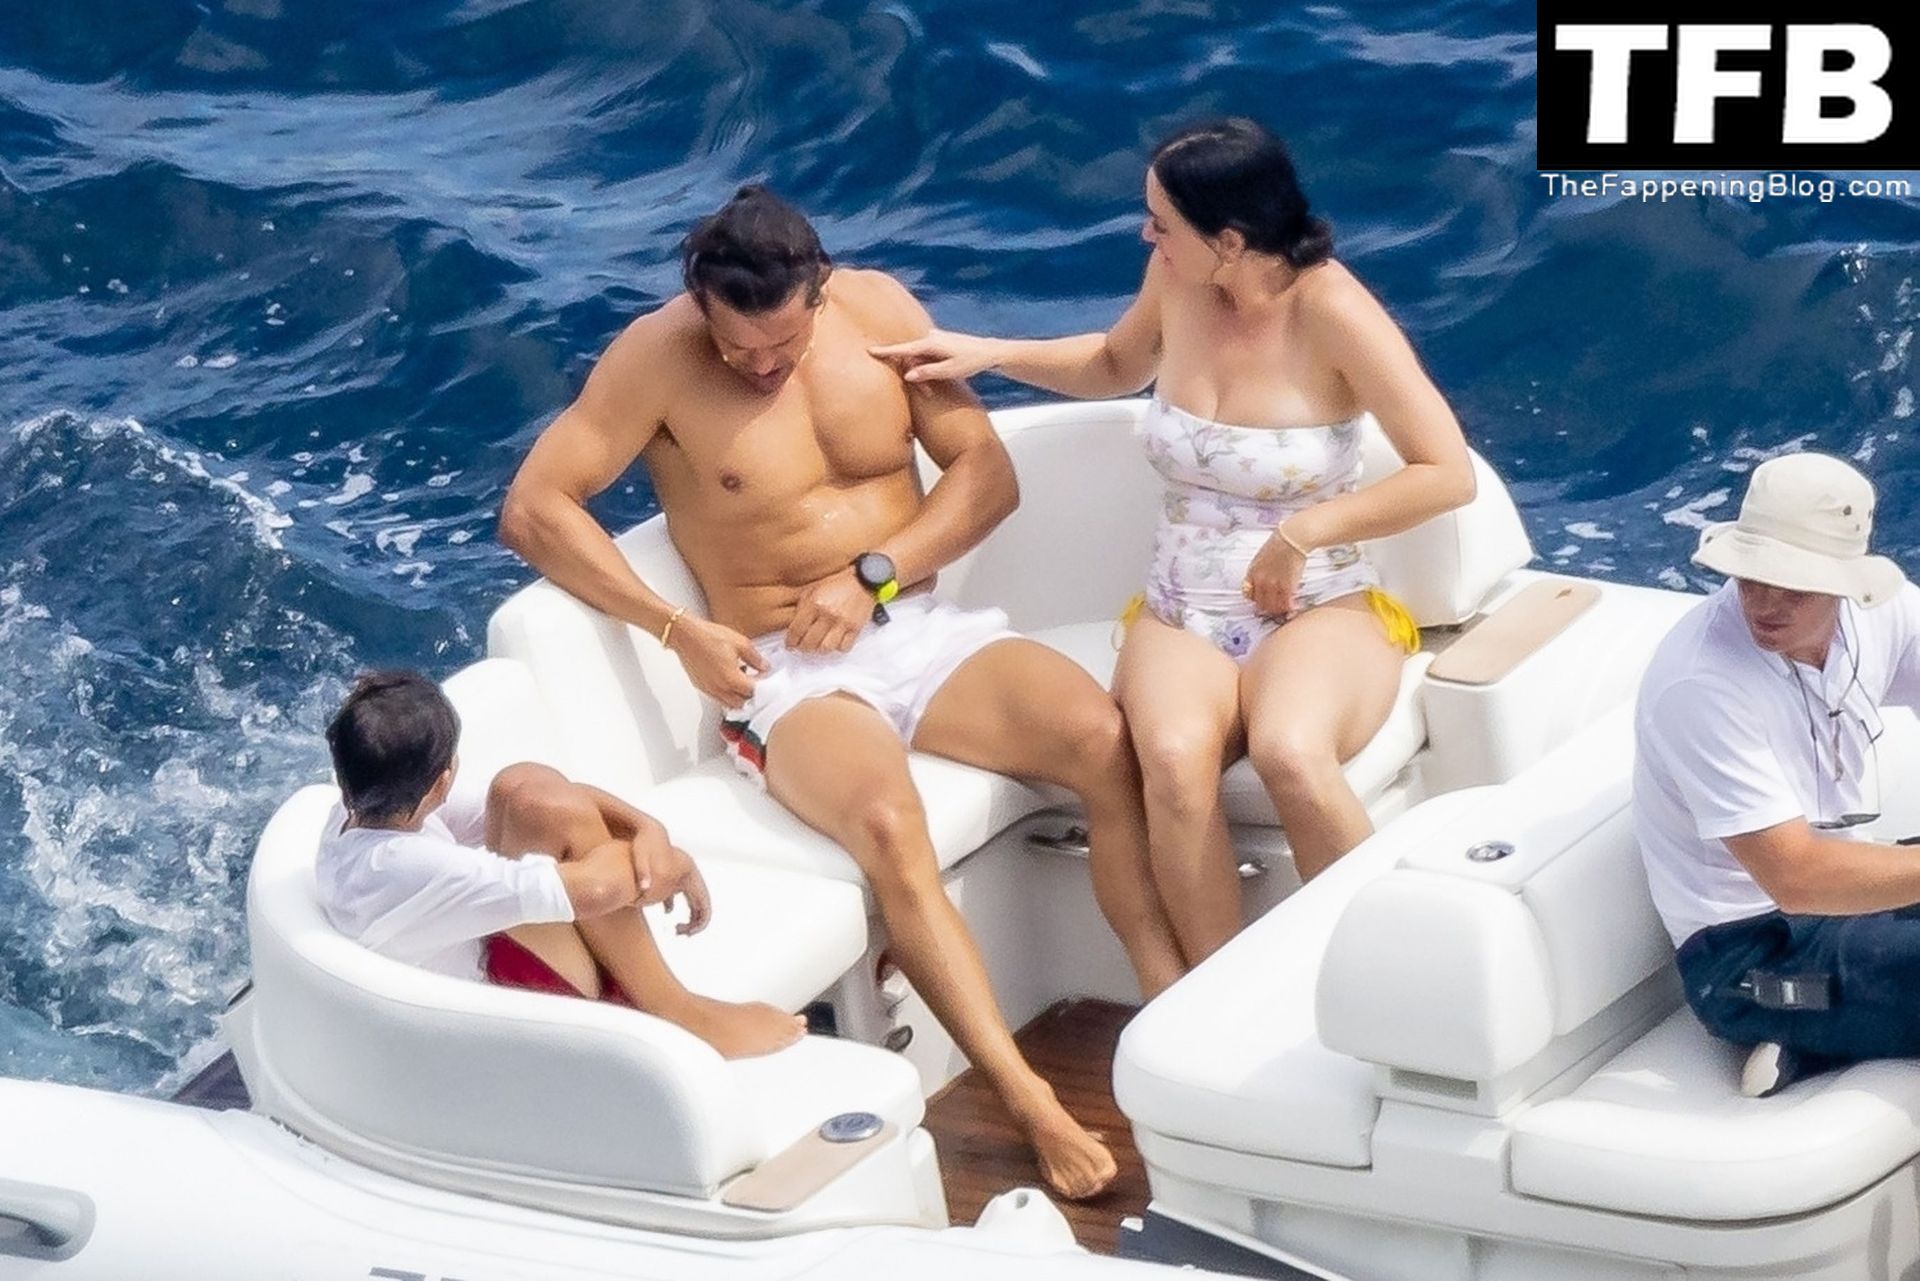 Katy Perry Sexy The Fappening Blog 7 - Katy Perry Rocks a Strapless Swimsuit While Enjoying a Beach Day with Orlando Bloom in Positano (105 Photos)